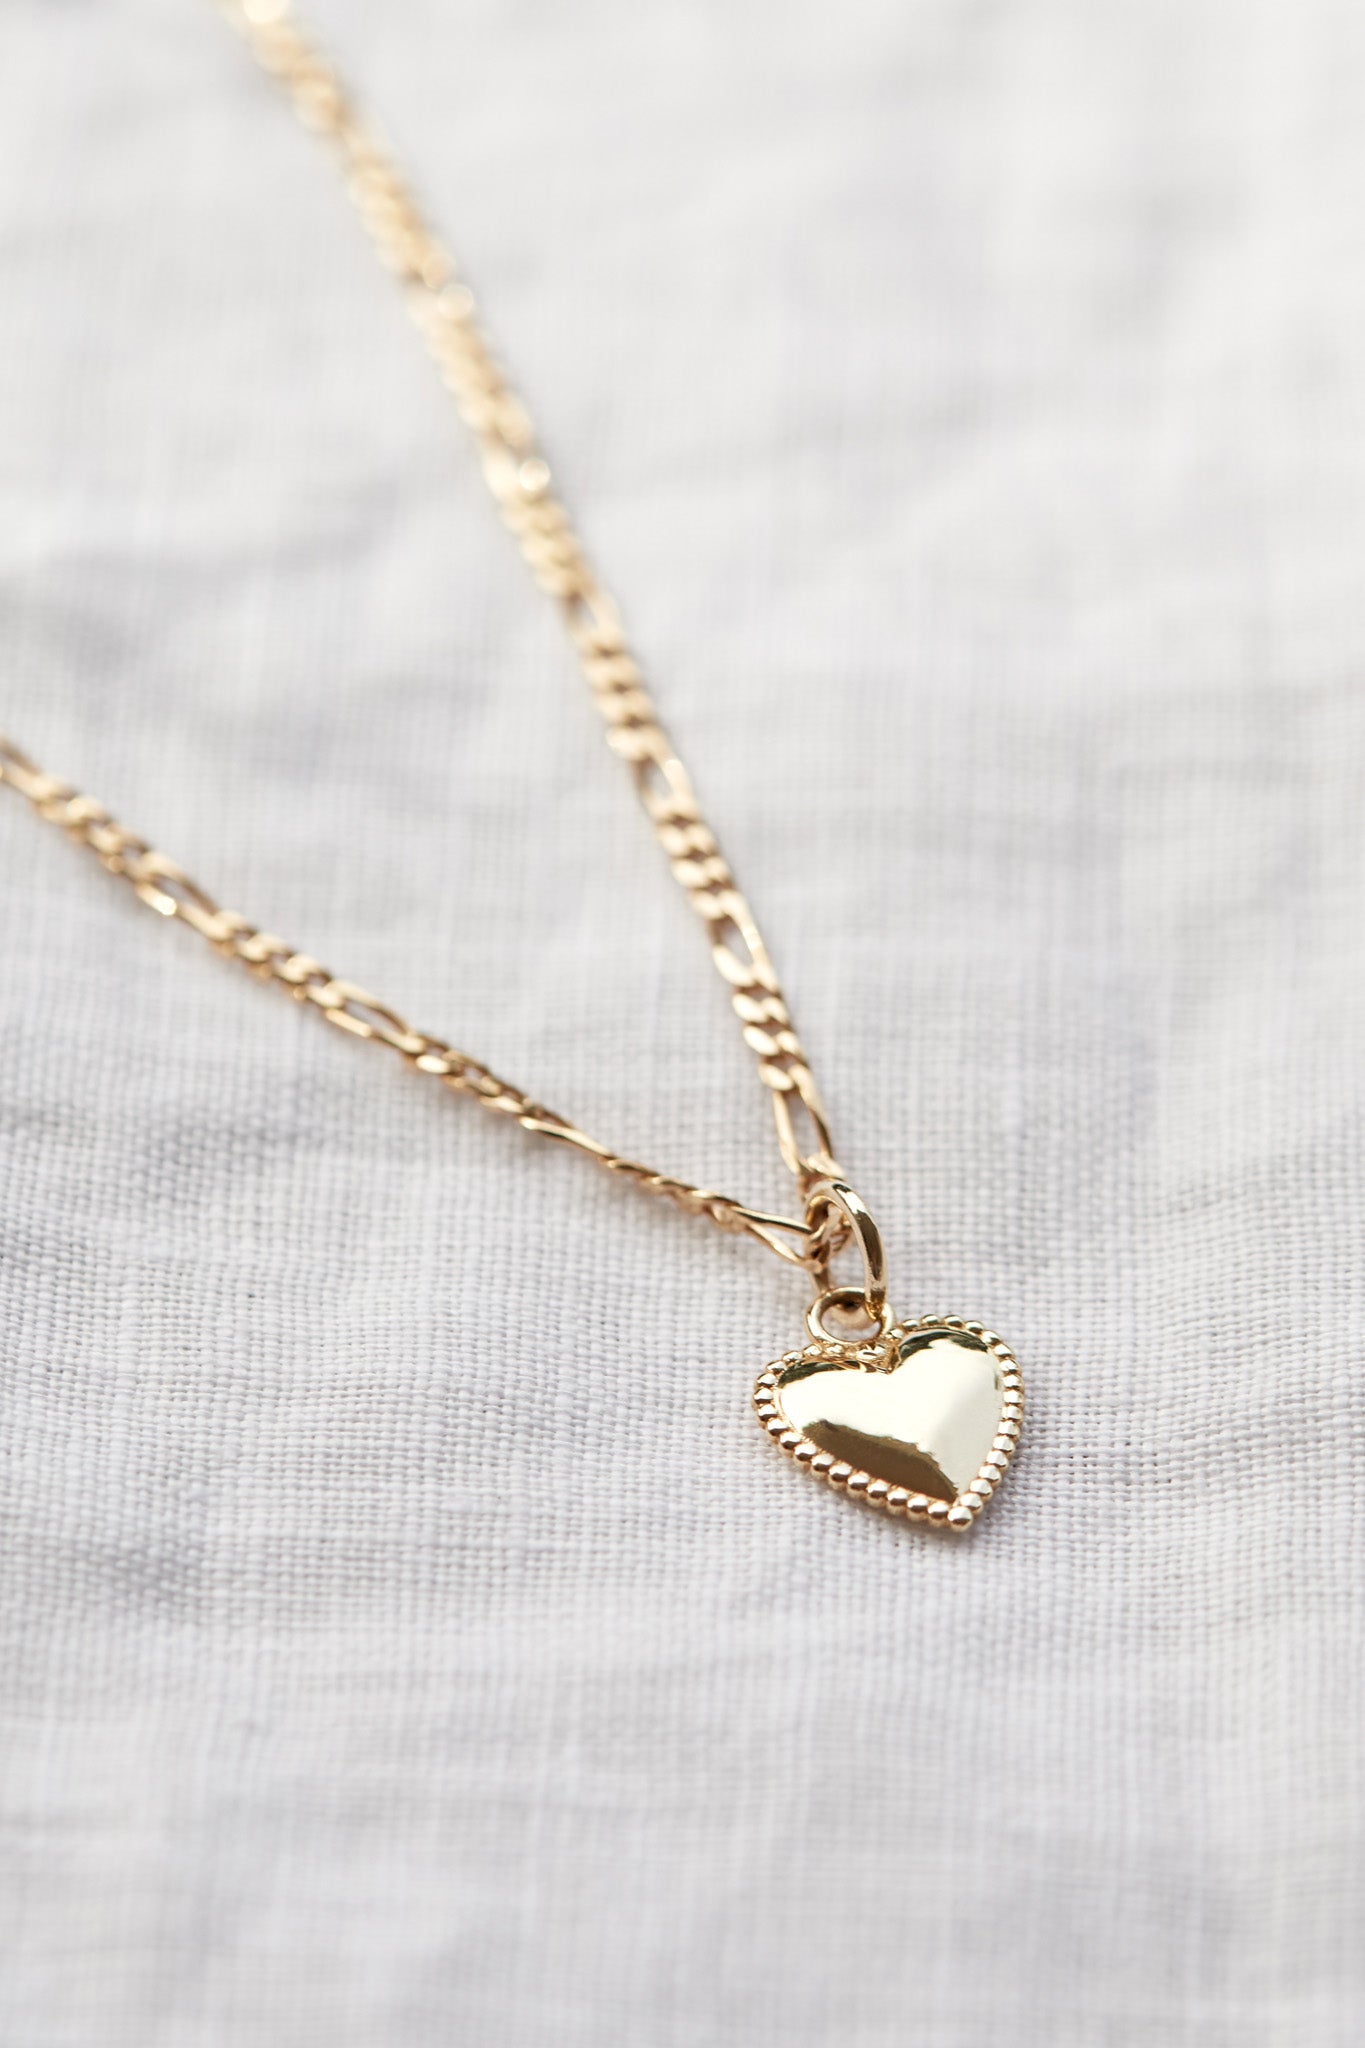 Elle Puffed Heart Pendant in 9ct Yellow Gold